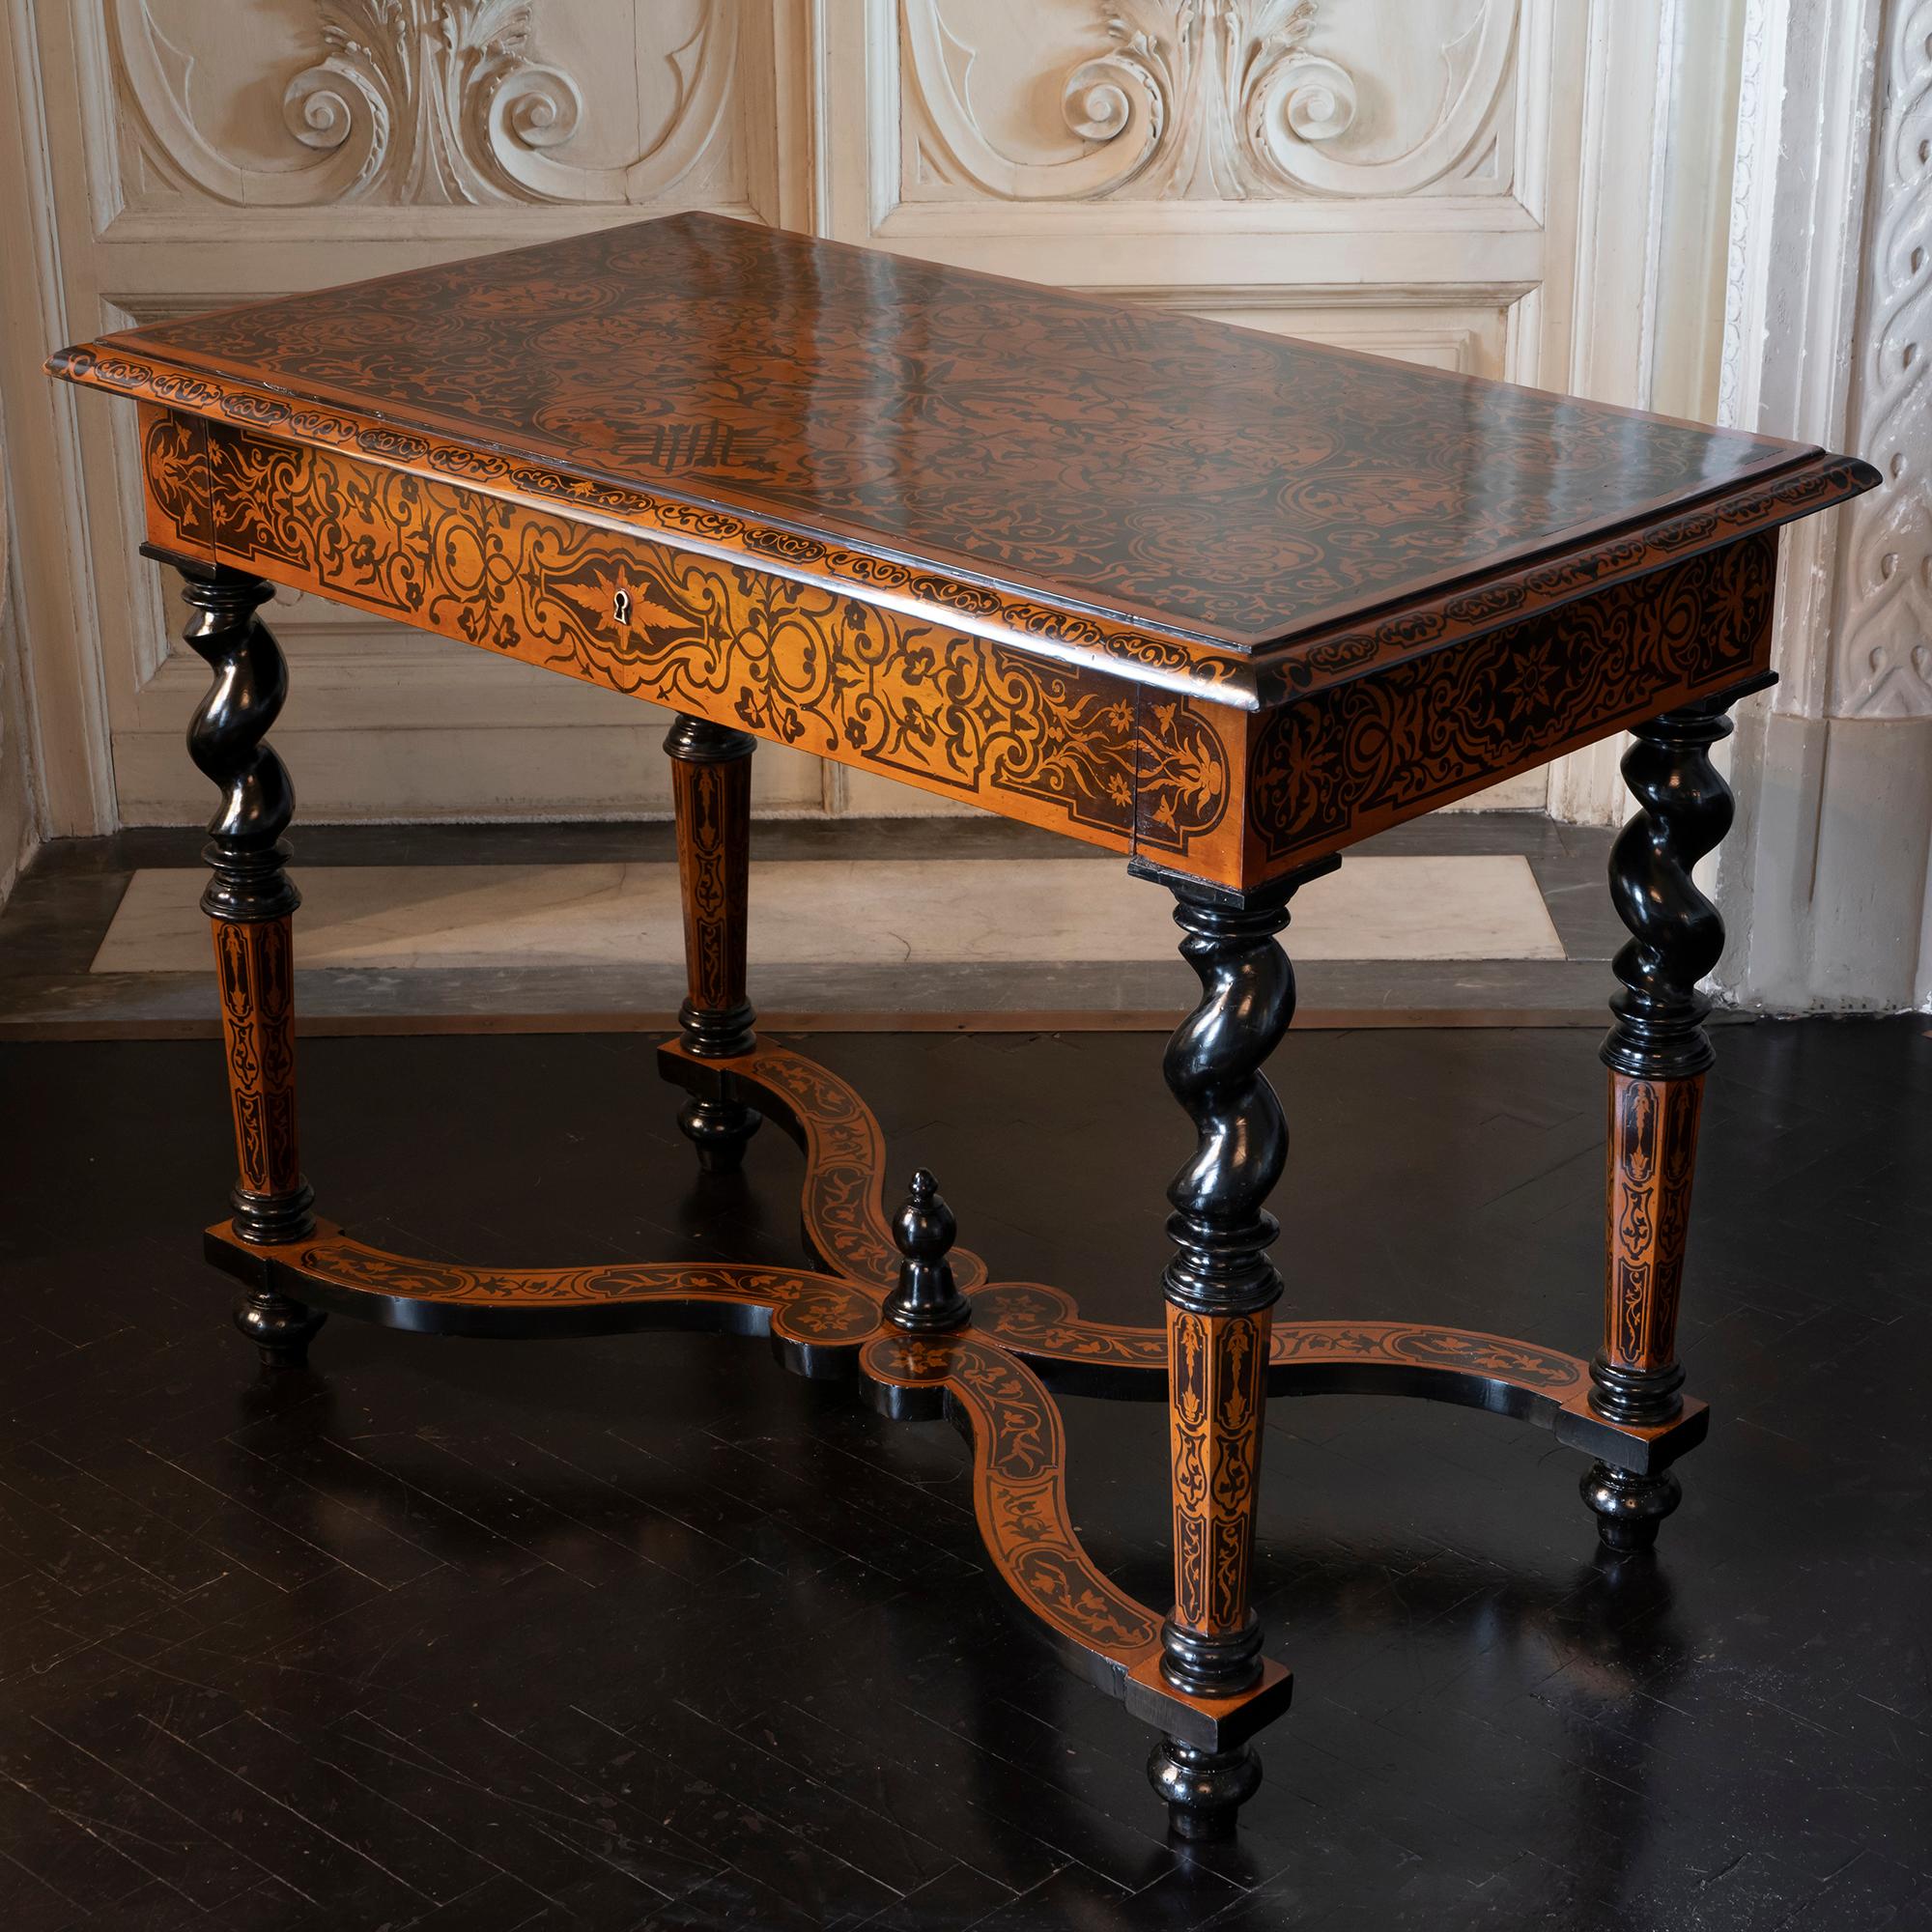 Napoleon III Mid-19th Century Walnut Inlaid Floral Marquetry French Writing Table